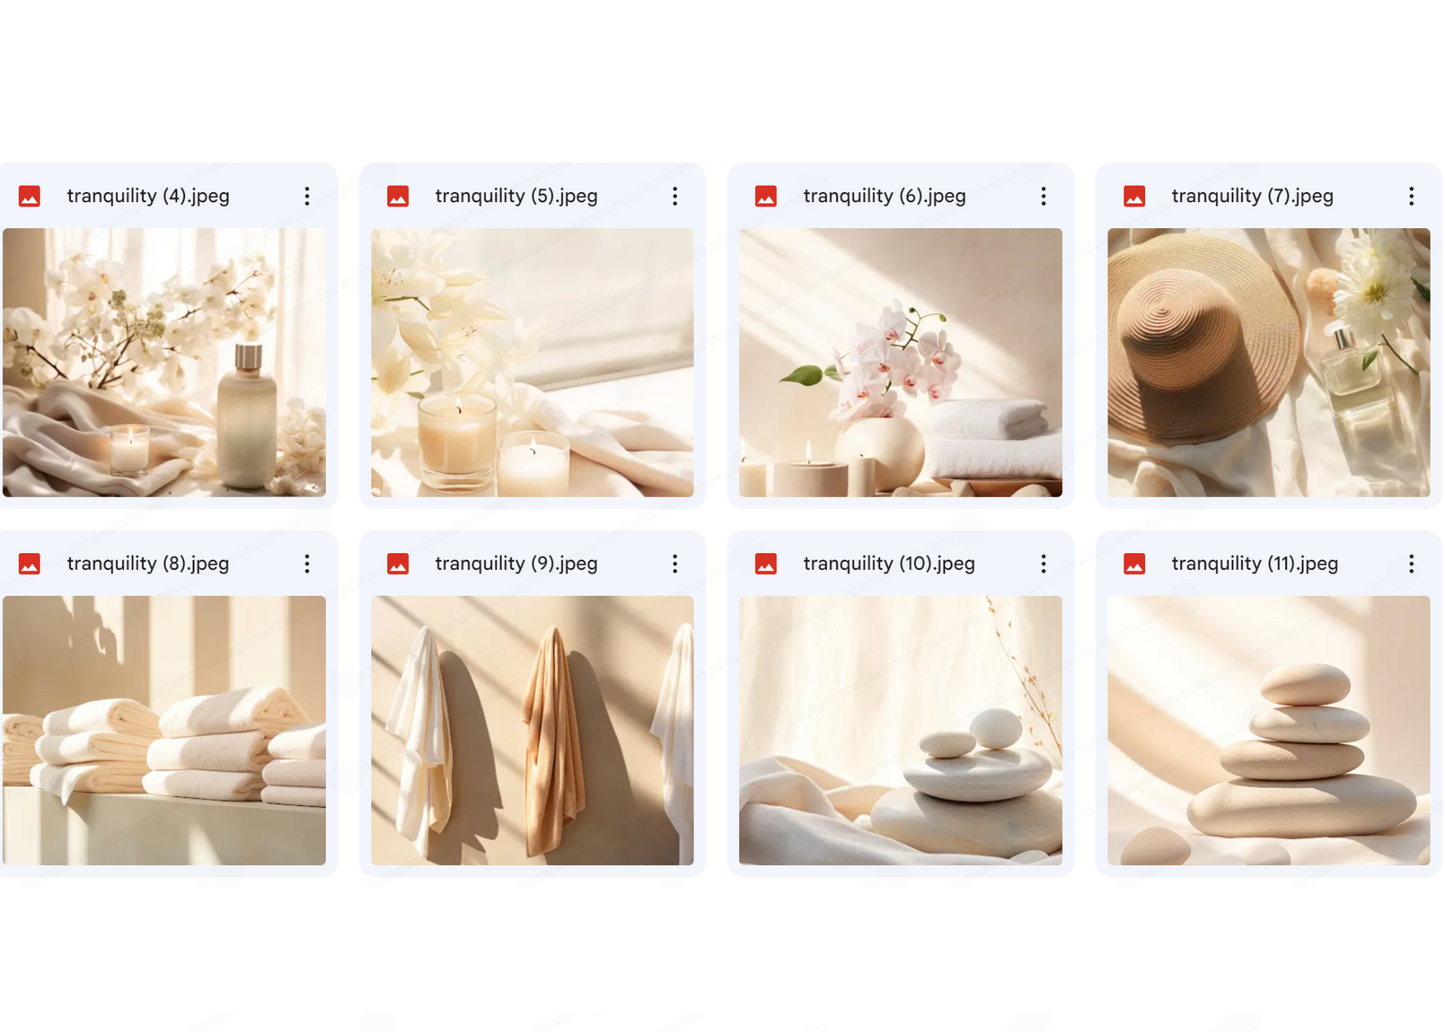 Tranquility Stock Photo Bundle -15 Airy Cream Colored Photos- Specialty Stock Photos PLR (For Your Use Only )